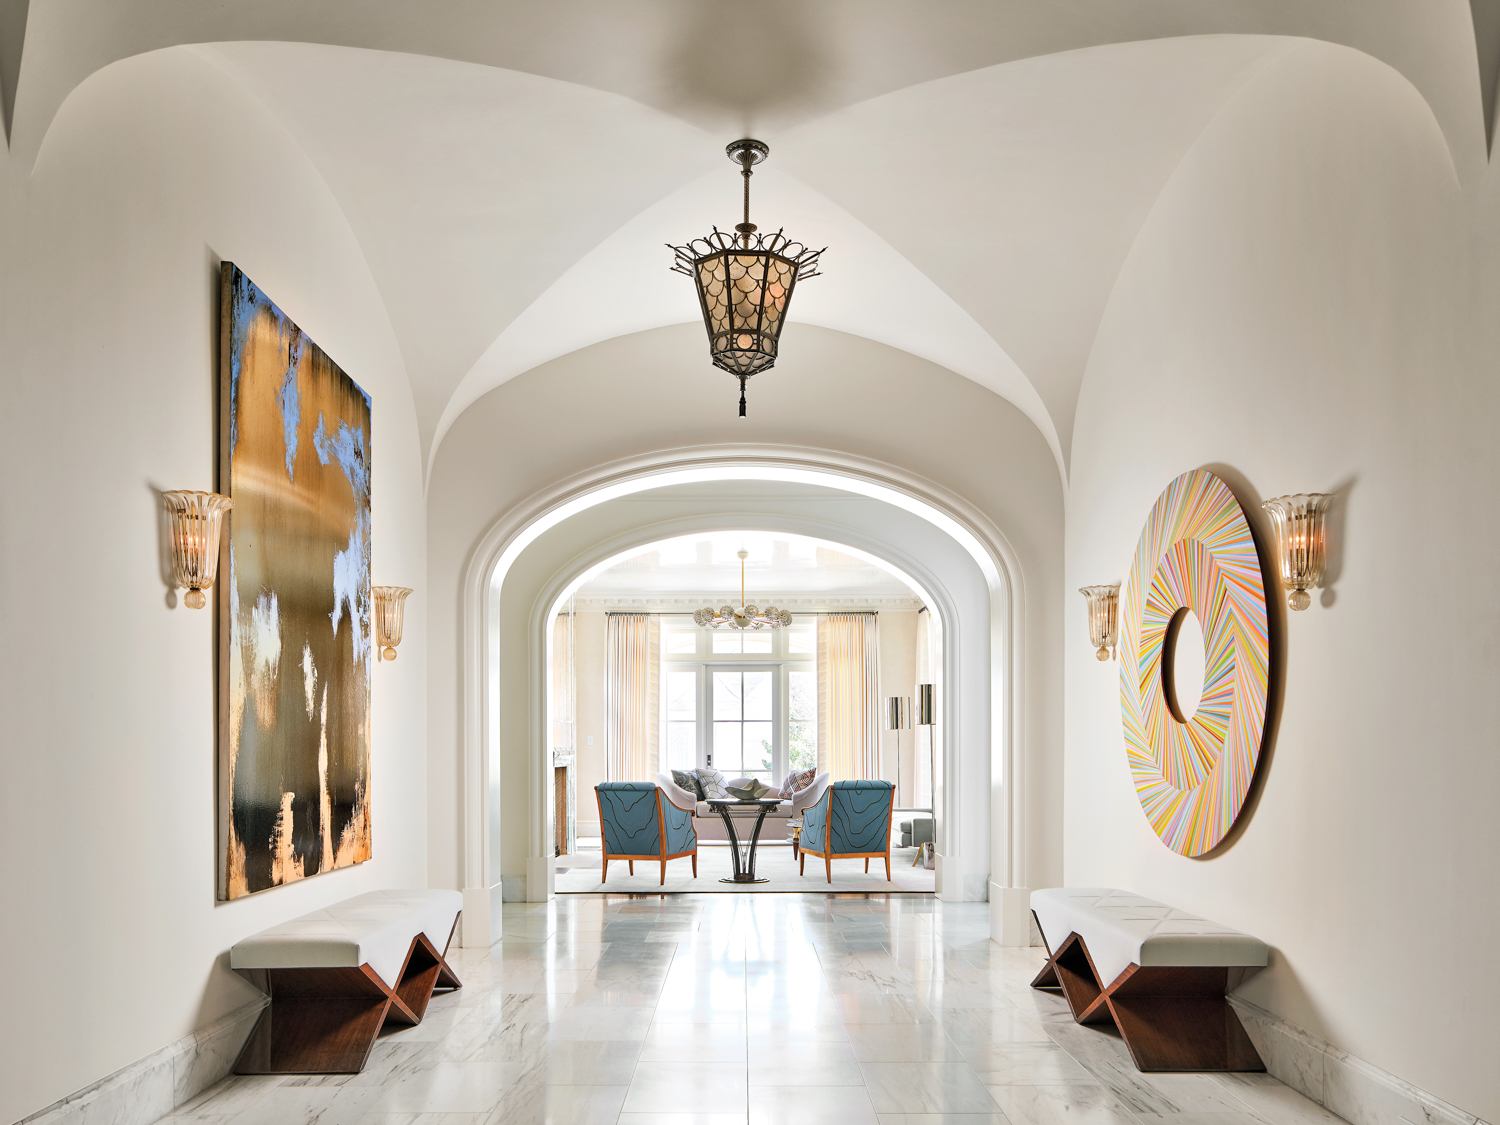 grand entry hall with groin vaulted ceiling